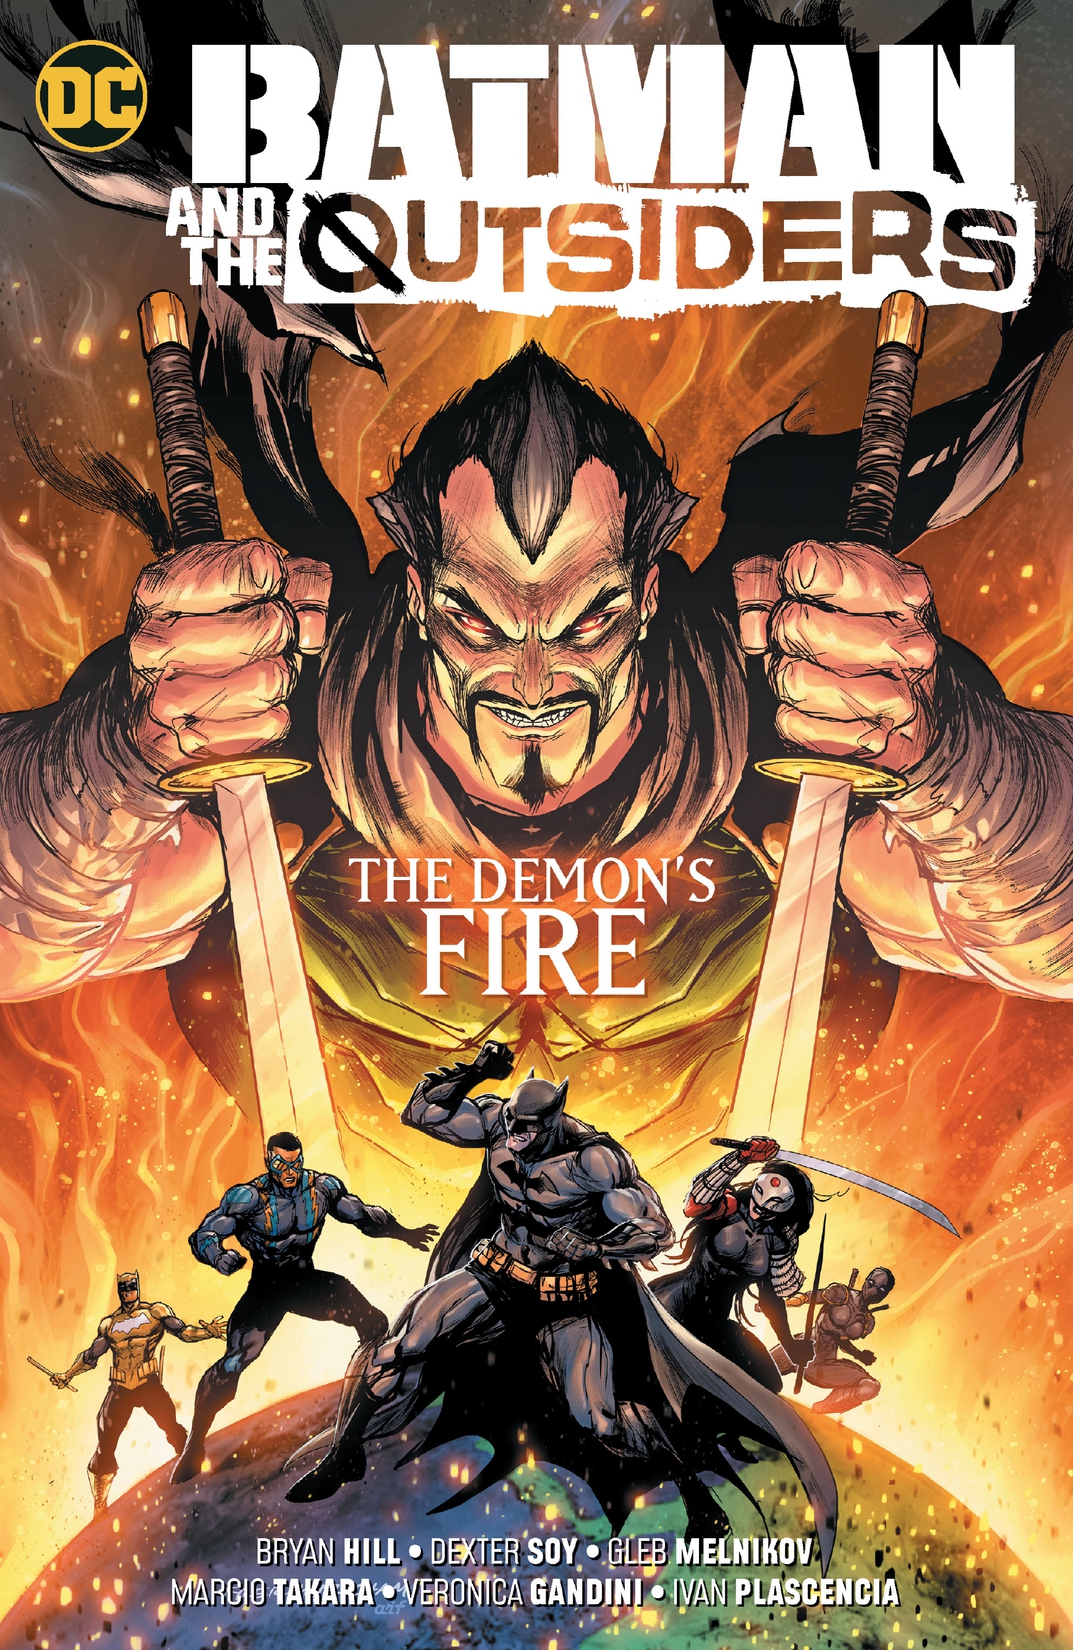 Batman & the Outsiders Vol. 3: The Demon's Fire preview images